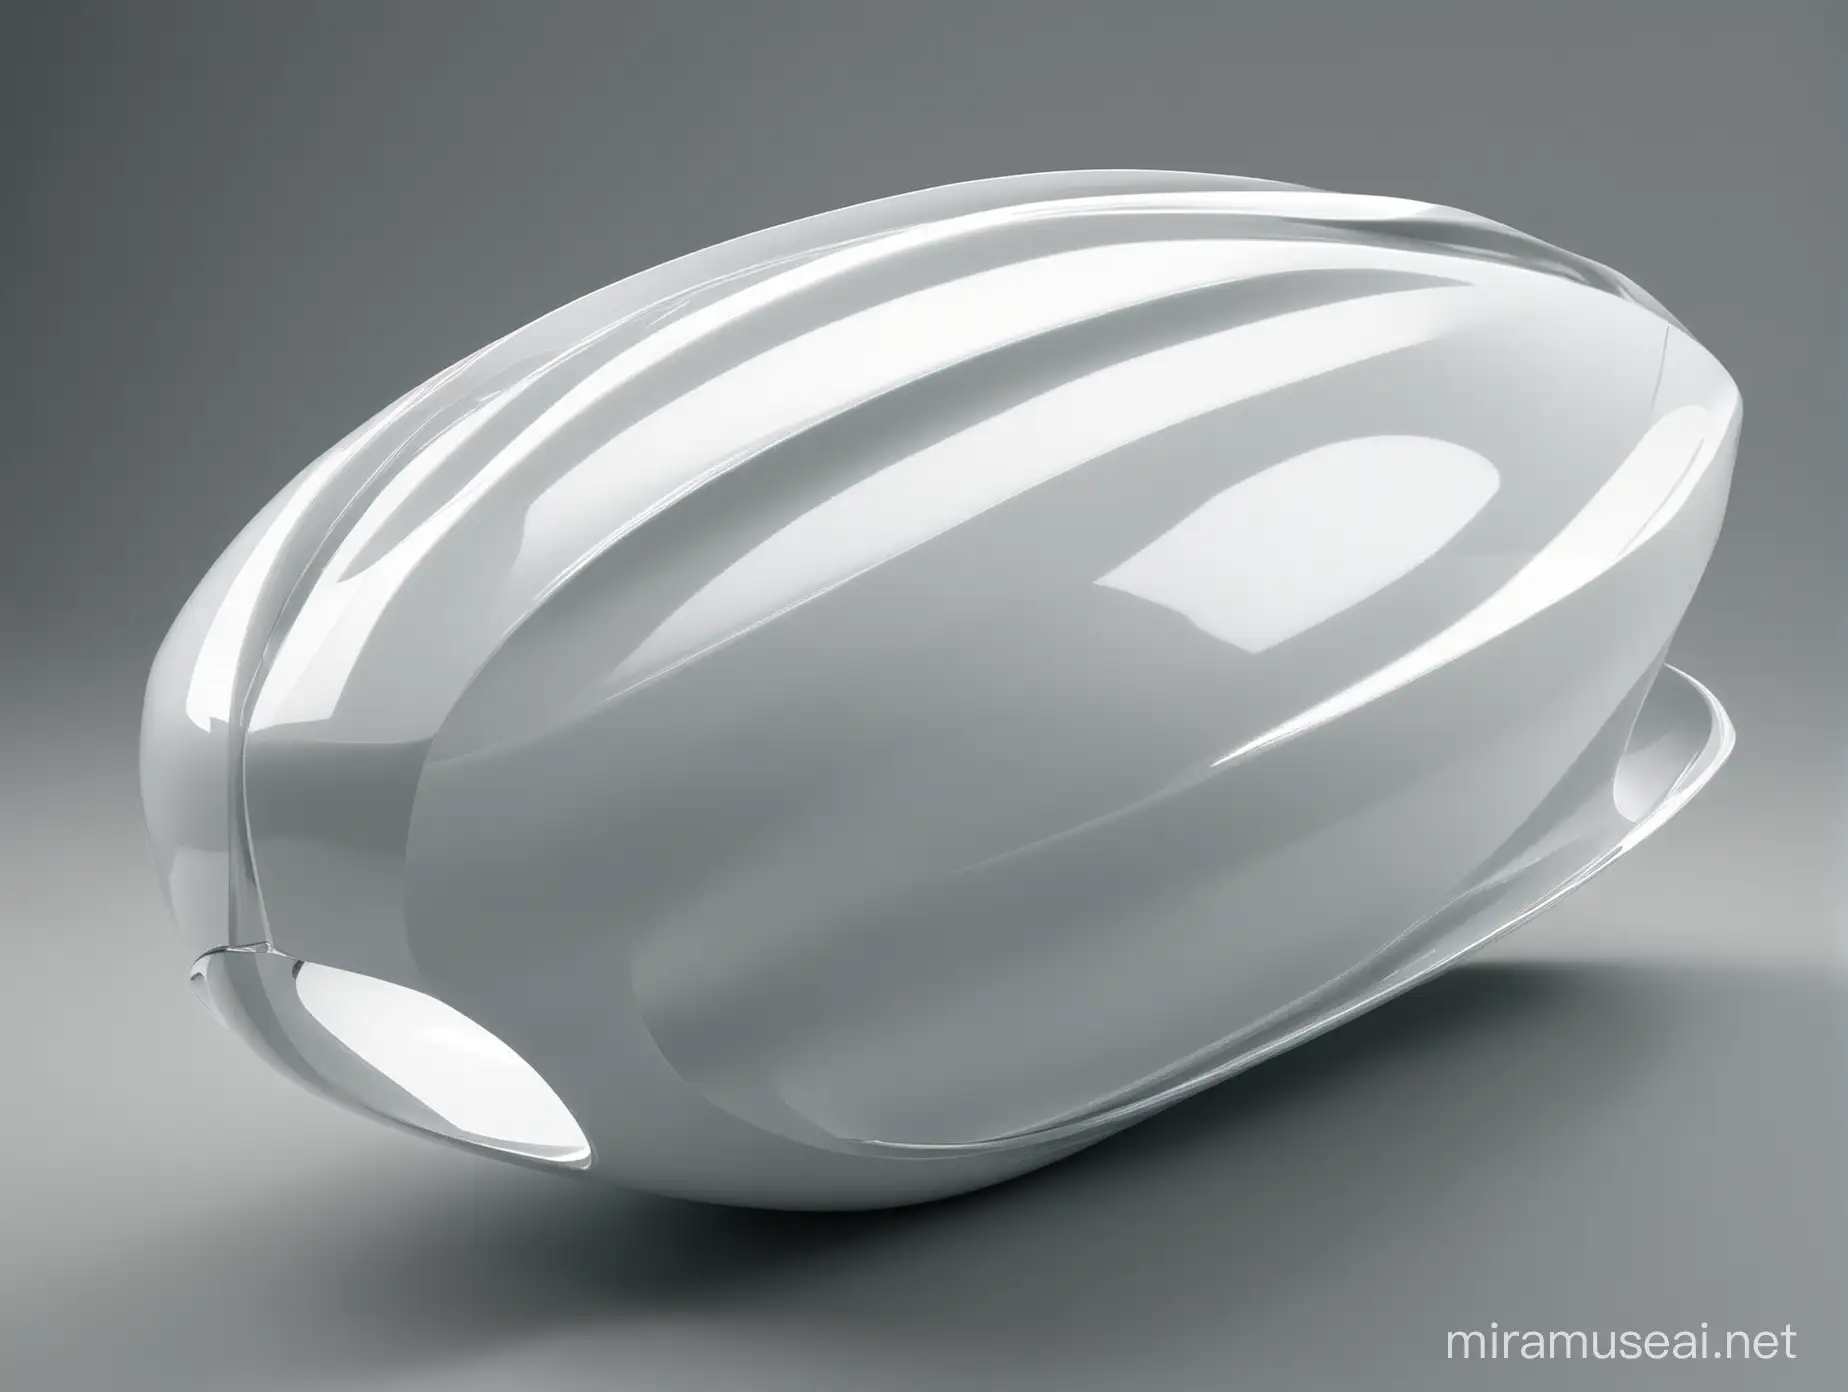 futuristic design piece made of fiberglass, high resolution, high quality, glossy look, modern look, smooth lines